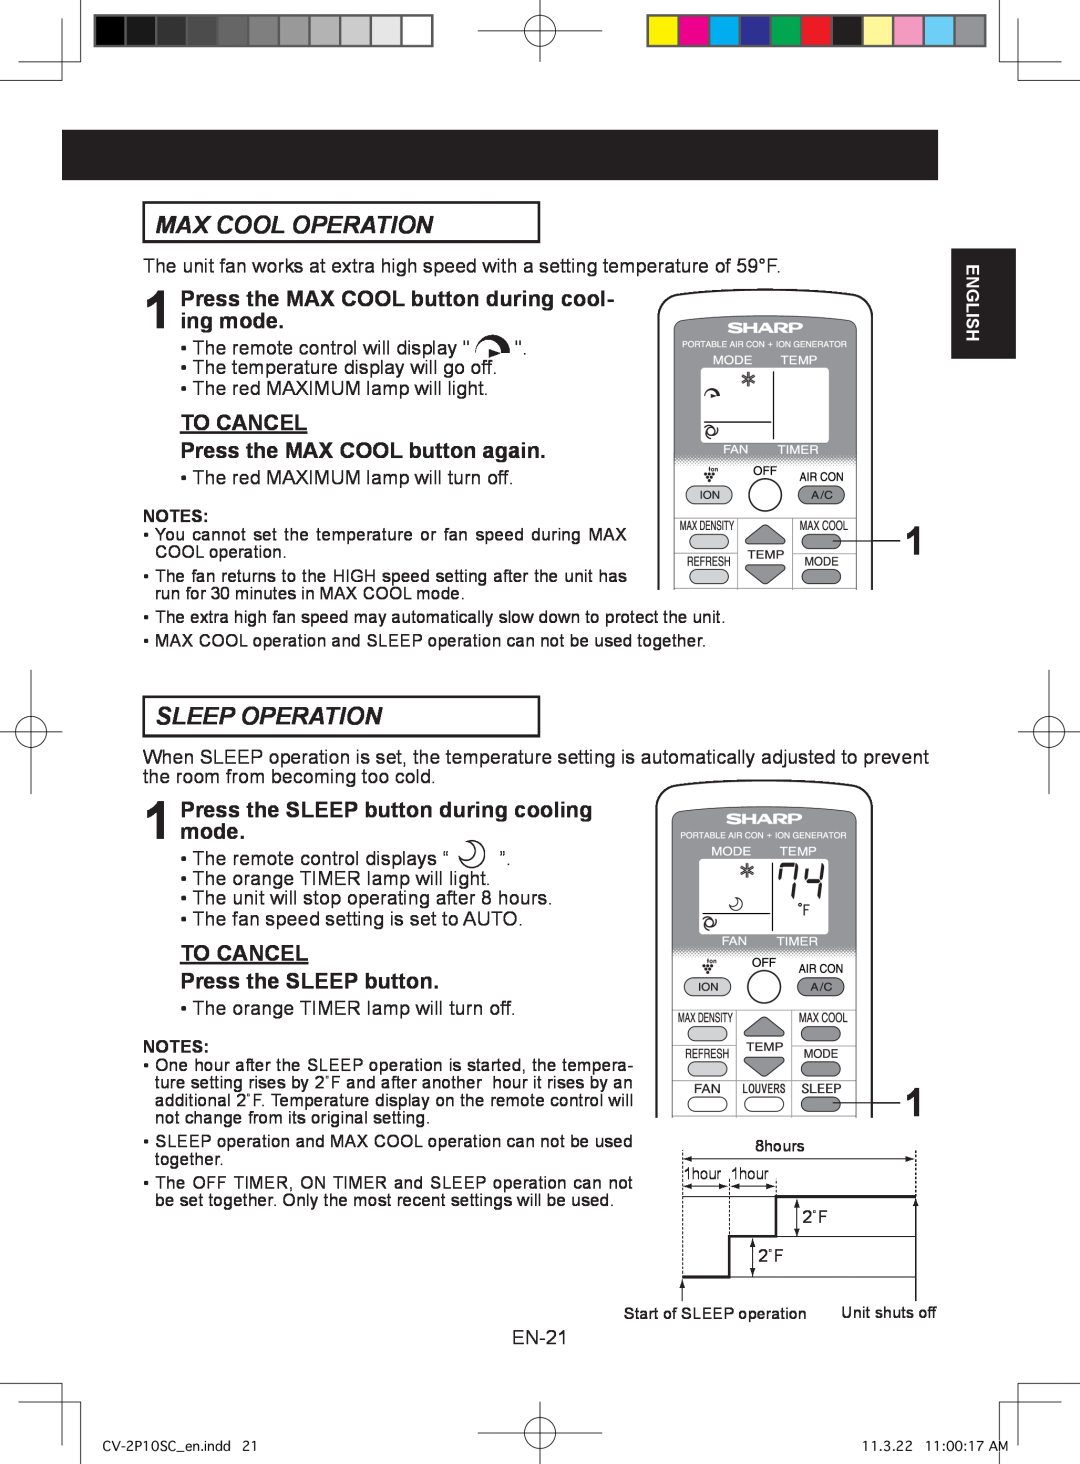 Sharp CV-2P10SC operation manual Max Cool Operation, Sleep Operation, Press the MAX COOL button during cool- ing mode 